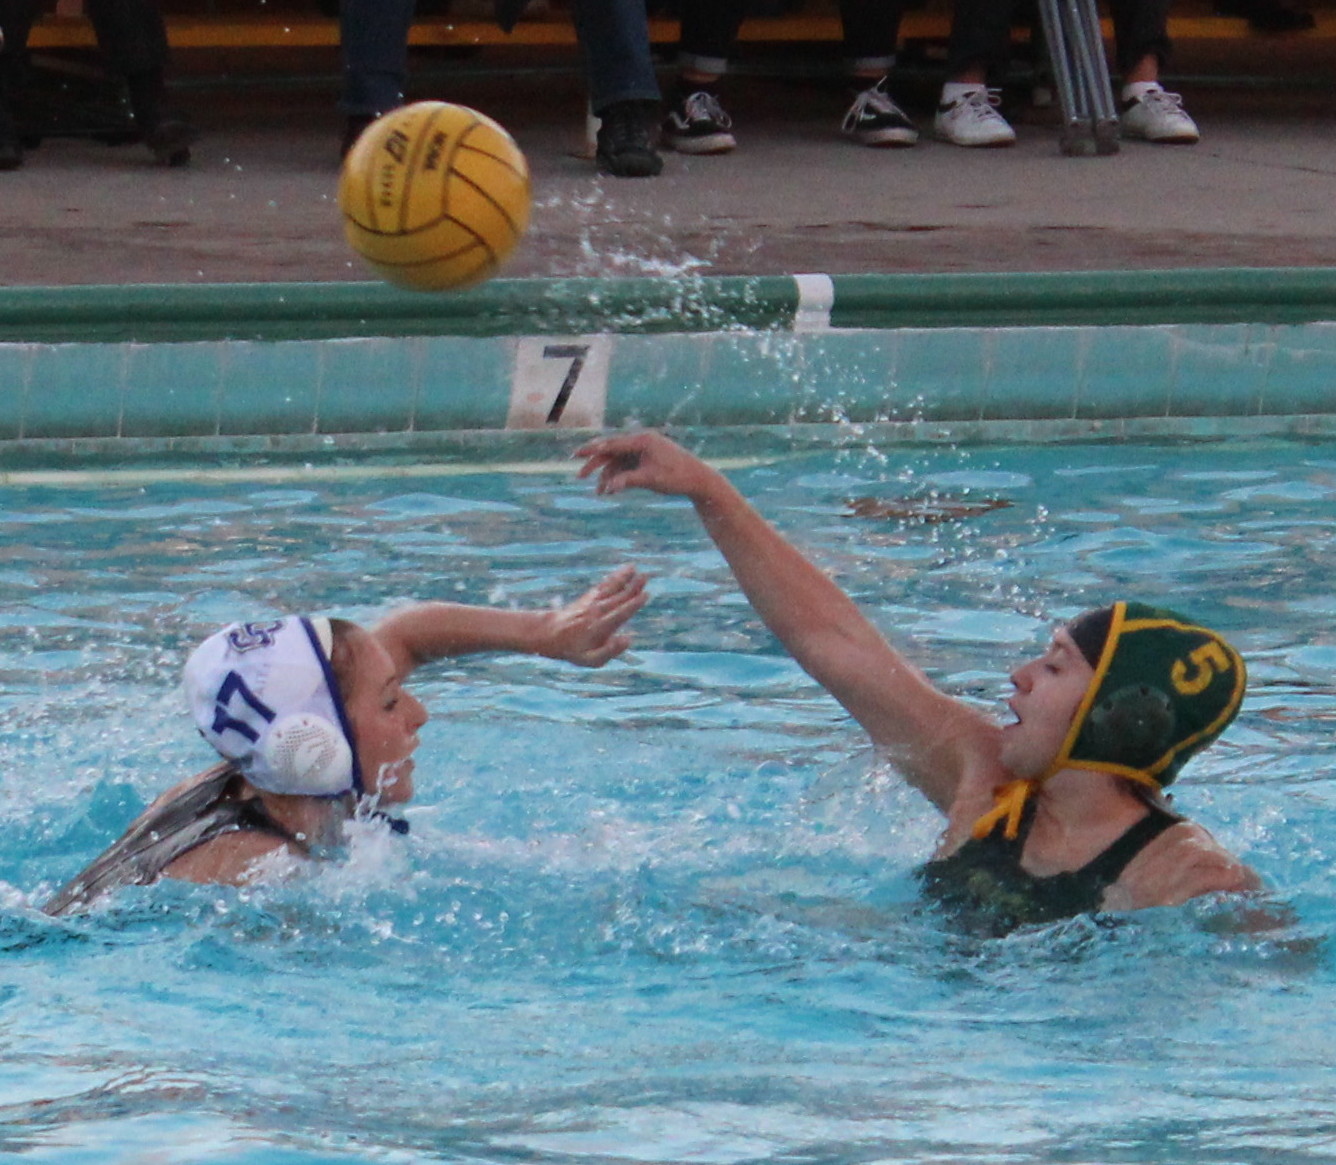 Water polo aims to repeat success